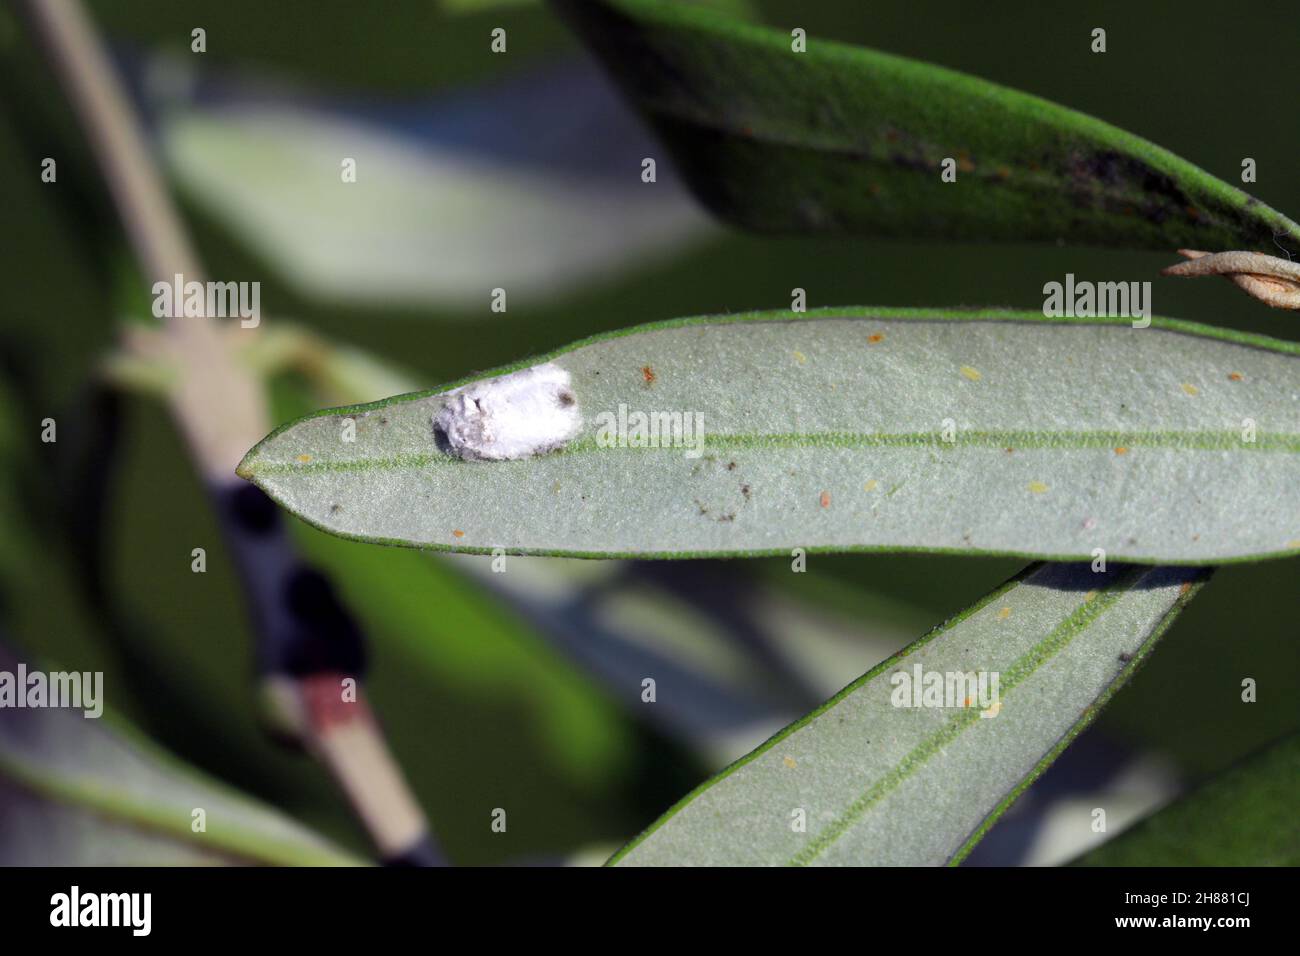 Long-tailed mealybug (Pseudococcus longispinus) on an olive leaf. White cotton secreted by the female hides the eggs. Stock Photo